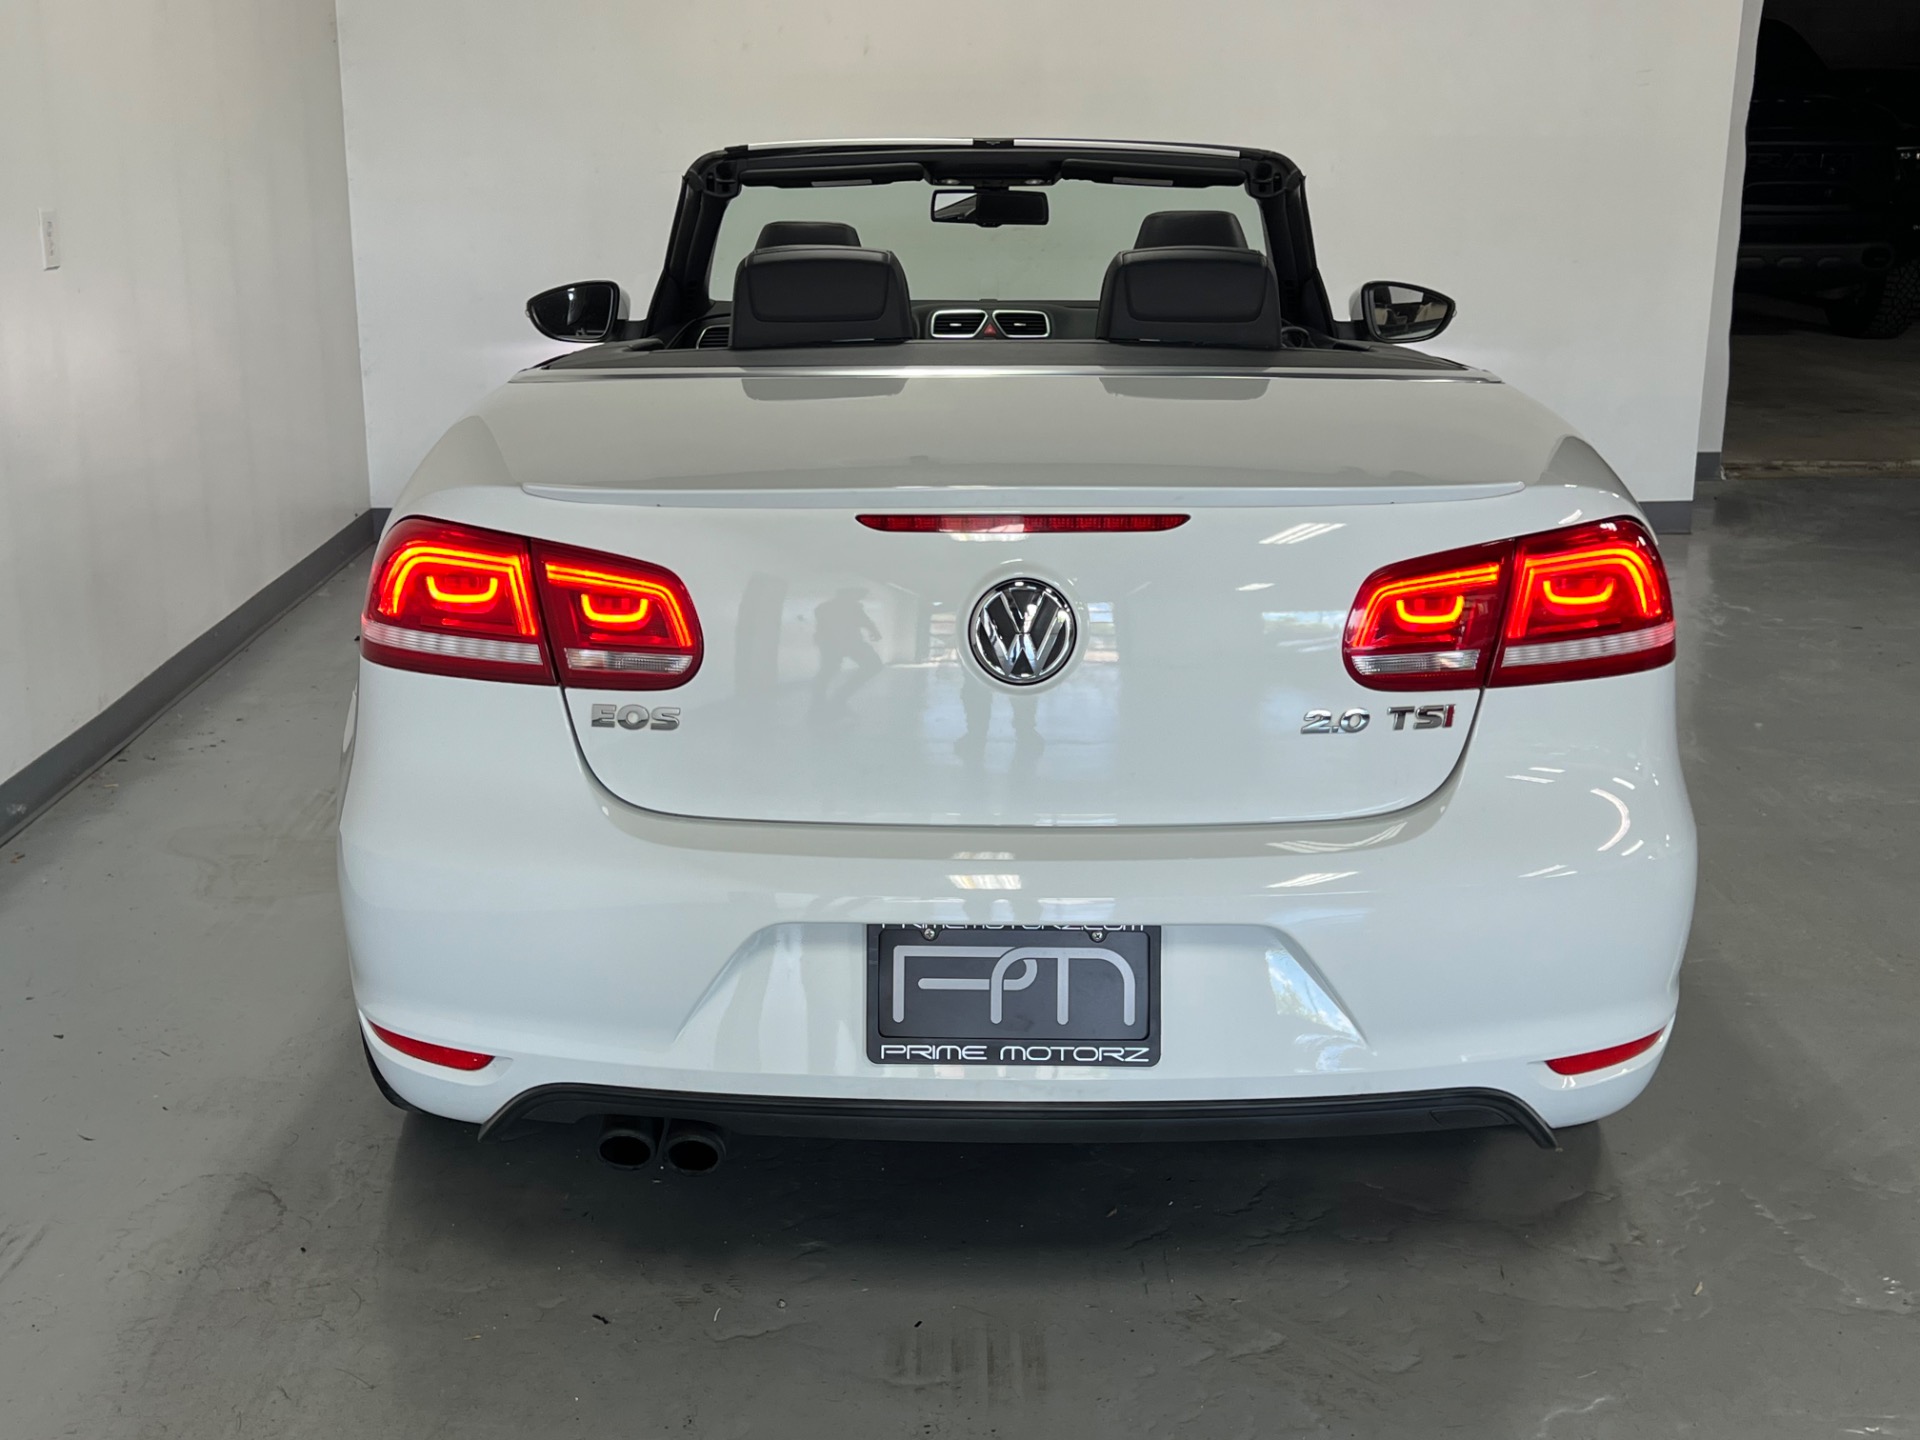 VW Eos offers both a sunroof and convertible – thereporteronline